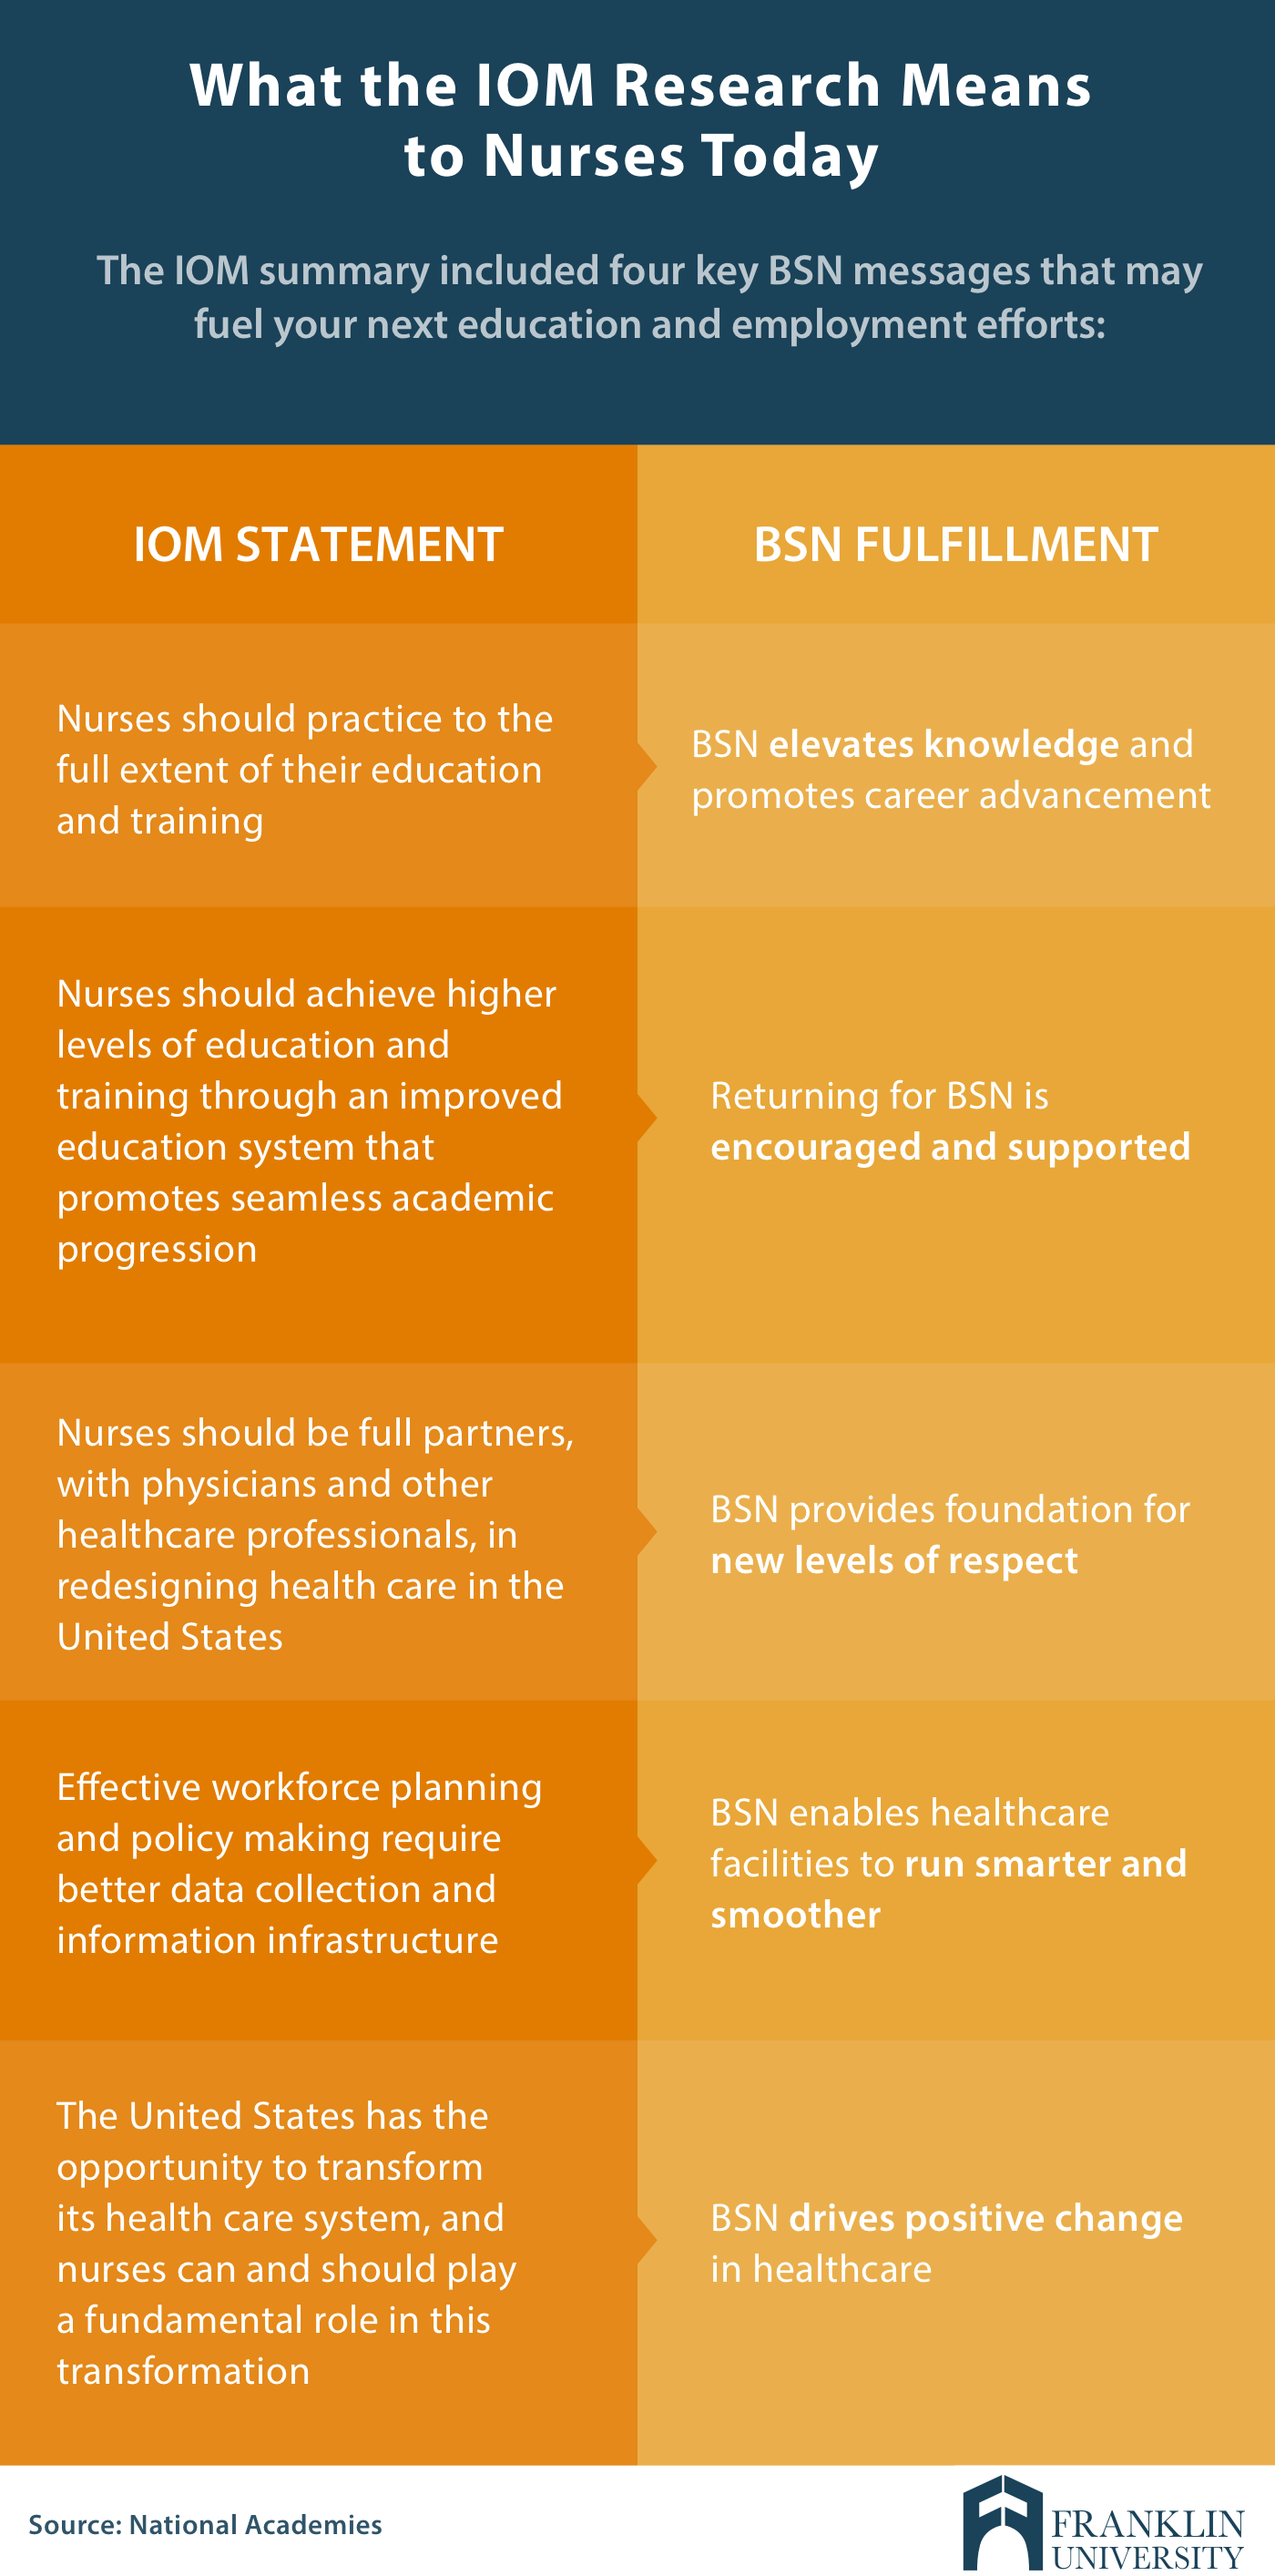 graphic describes what the IOM research means to nurses today